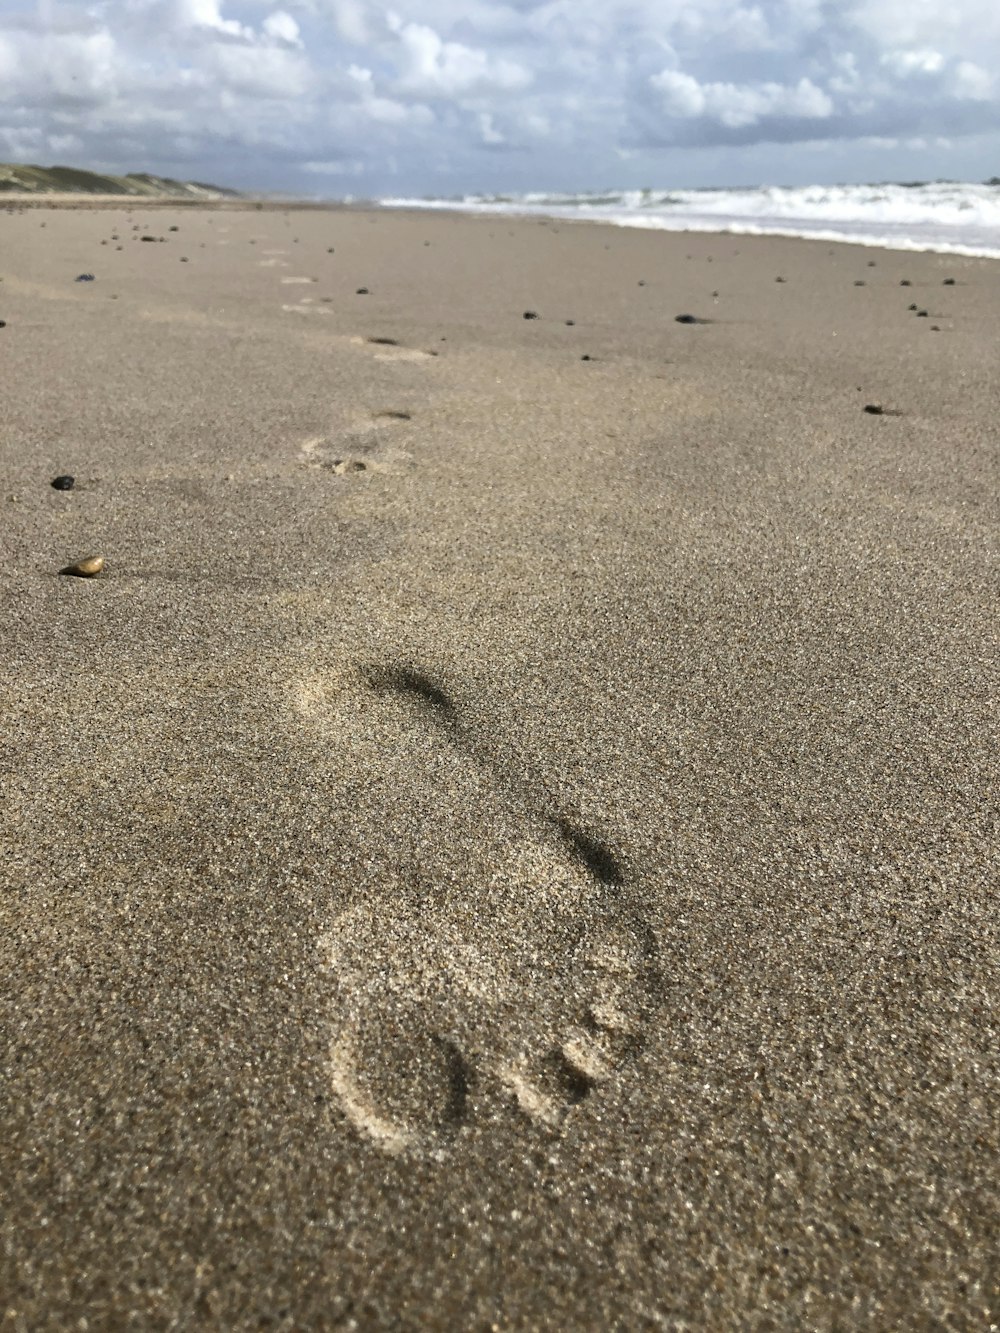 a person's footprints in the sand on a beach